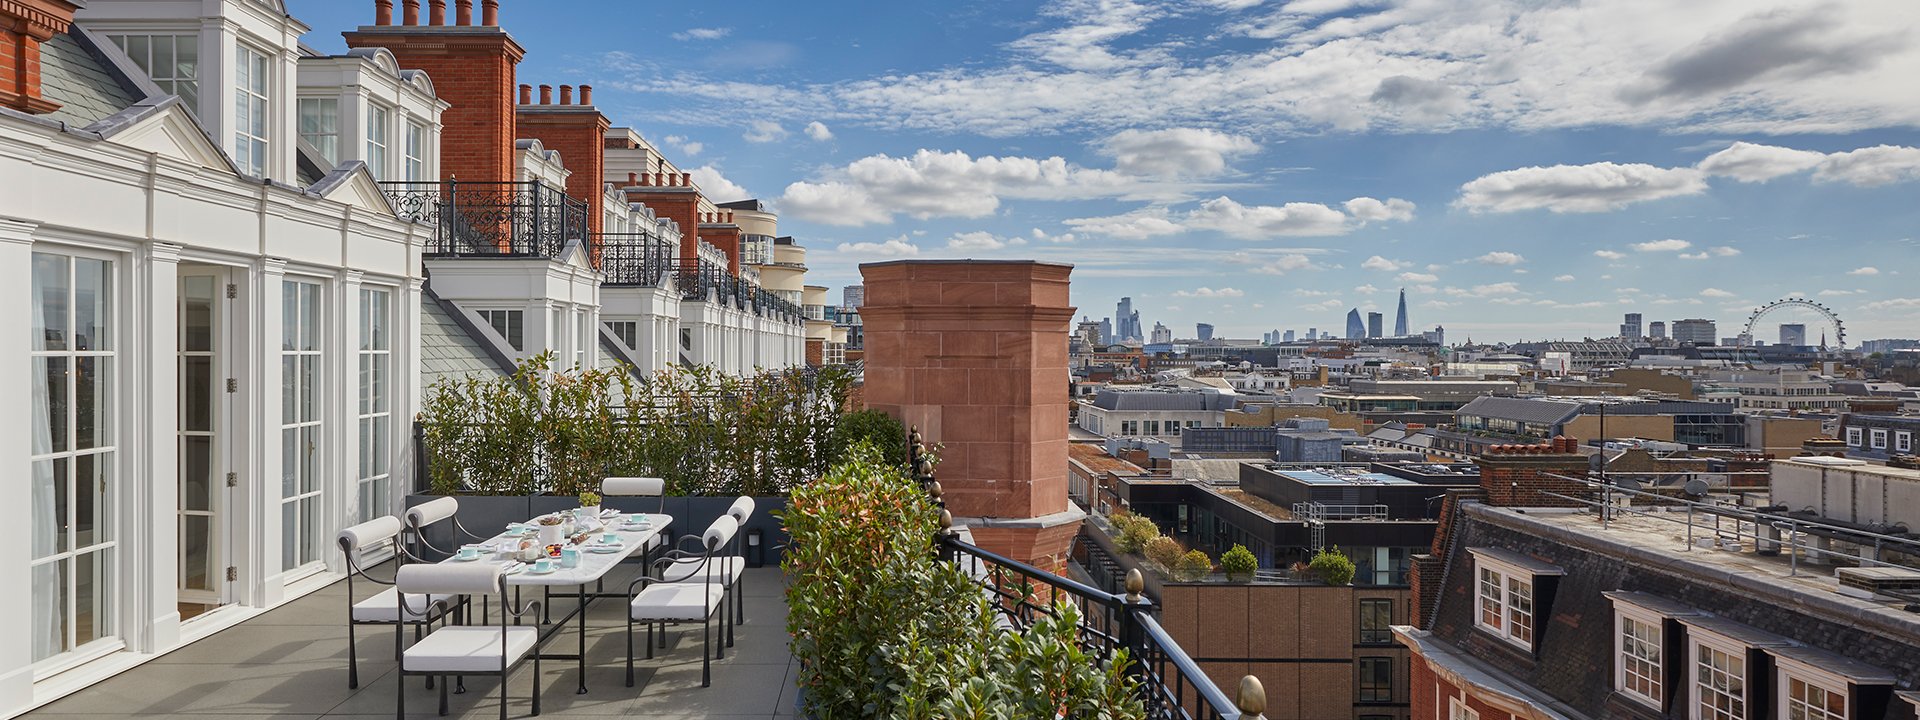 Claridge's Grand Terrace Suite - terrace with table and chairs and a view on the rooftops of London